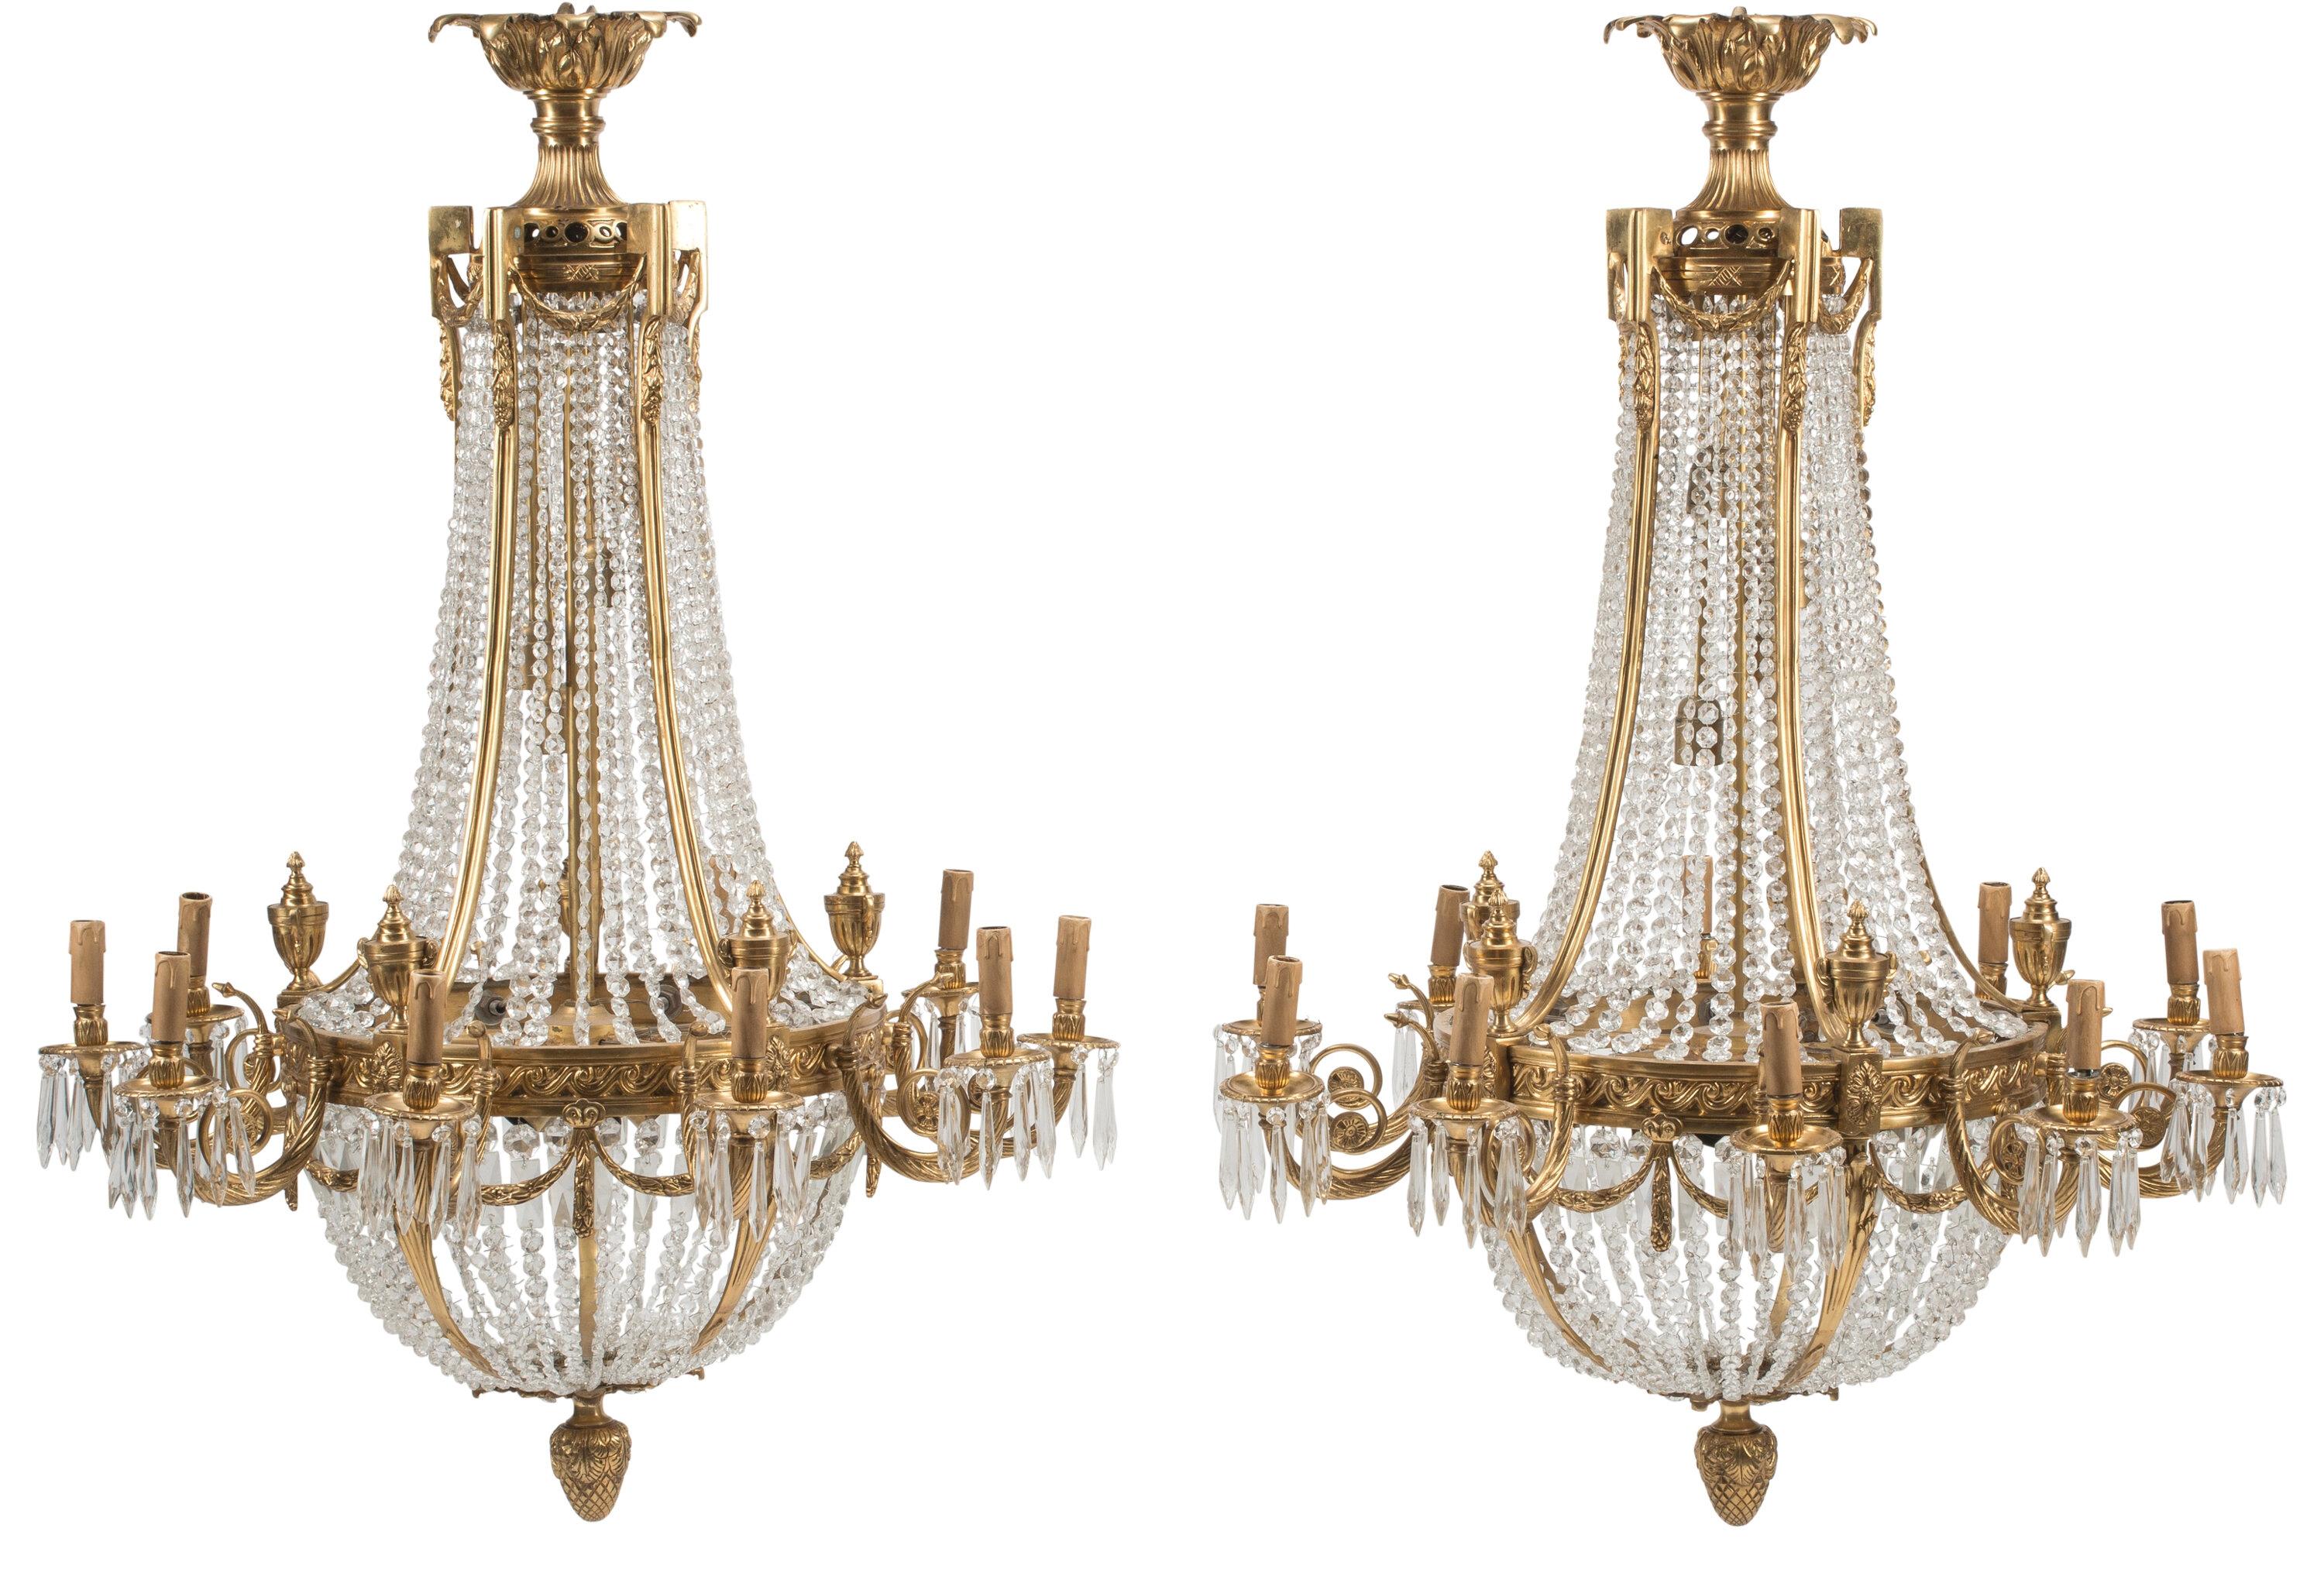 French Impressive Pair Of Neoclassical Style Cut Crystal And Bronze Chandeliers For Sale